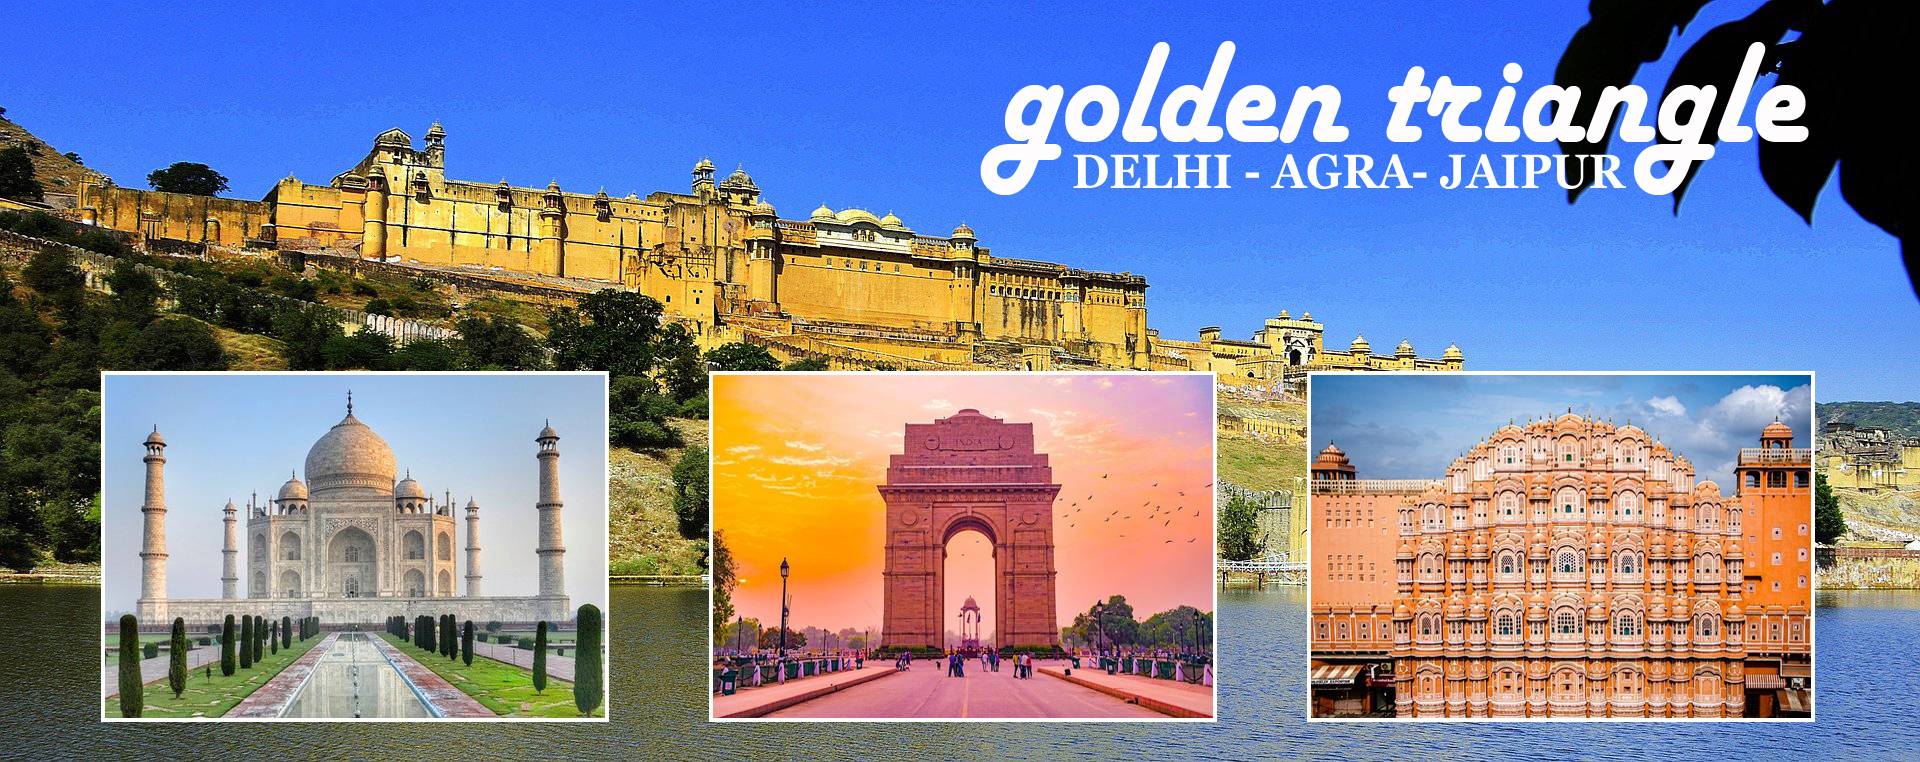 cruise and stay india golden triangle